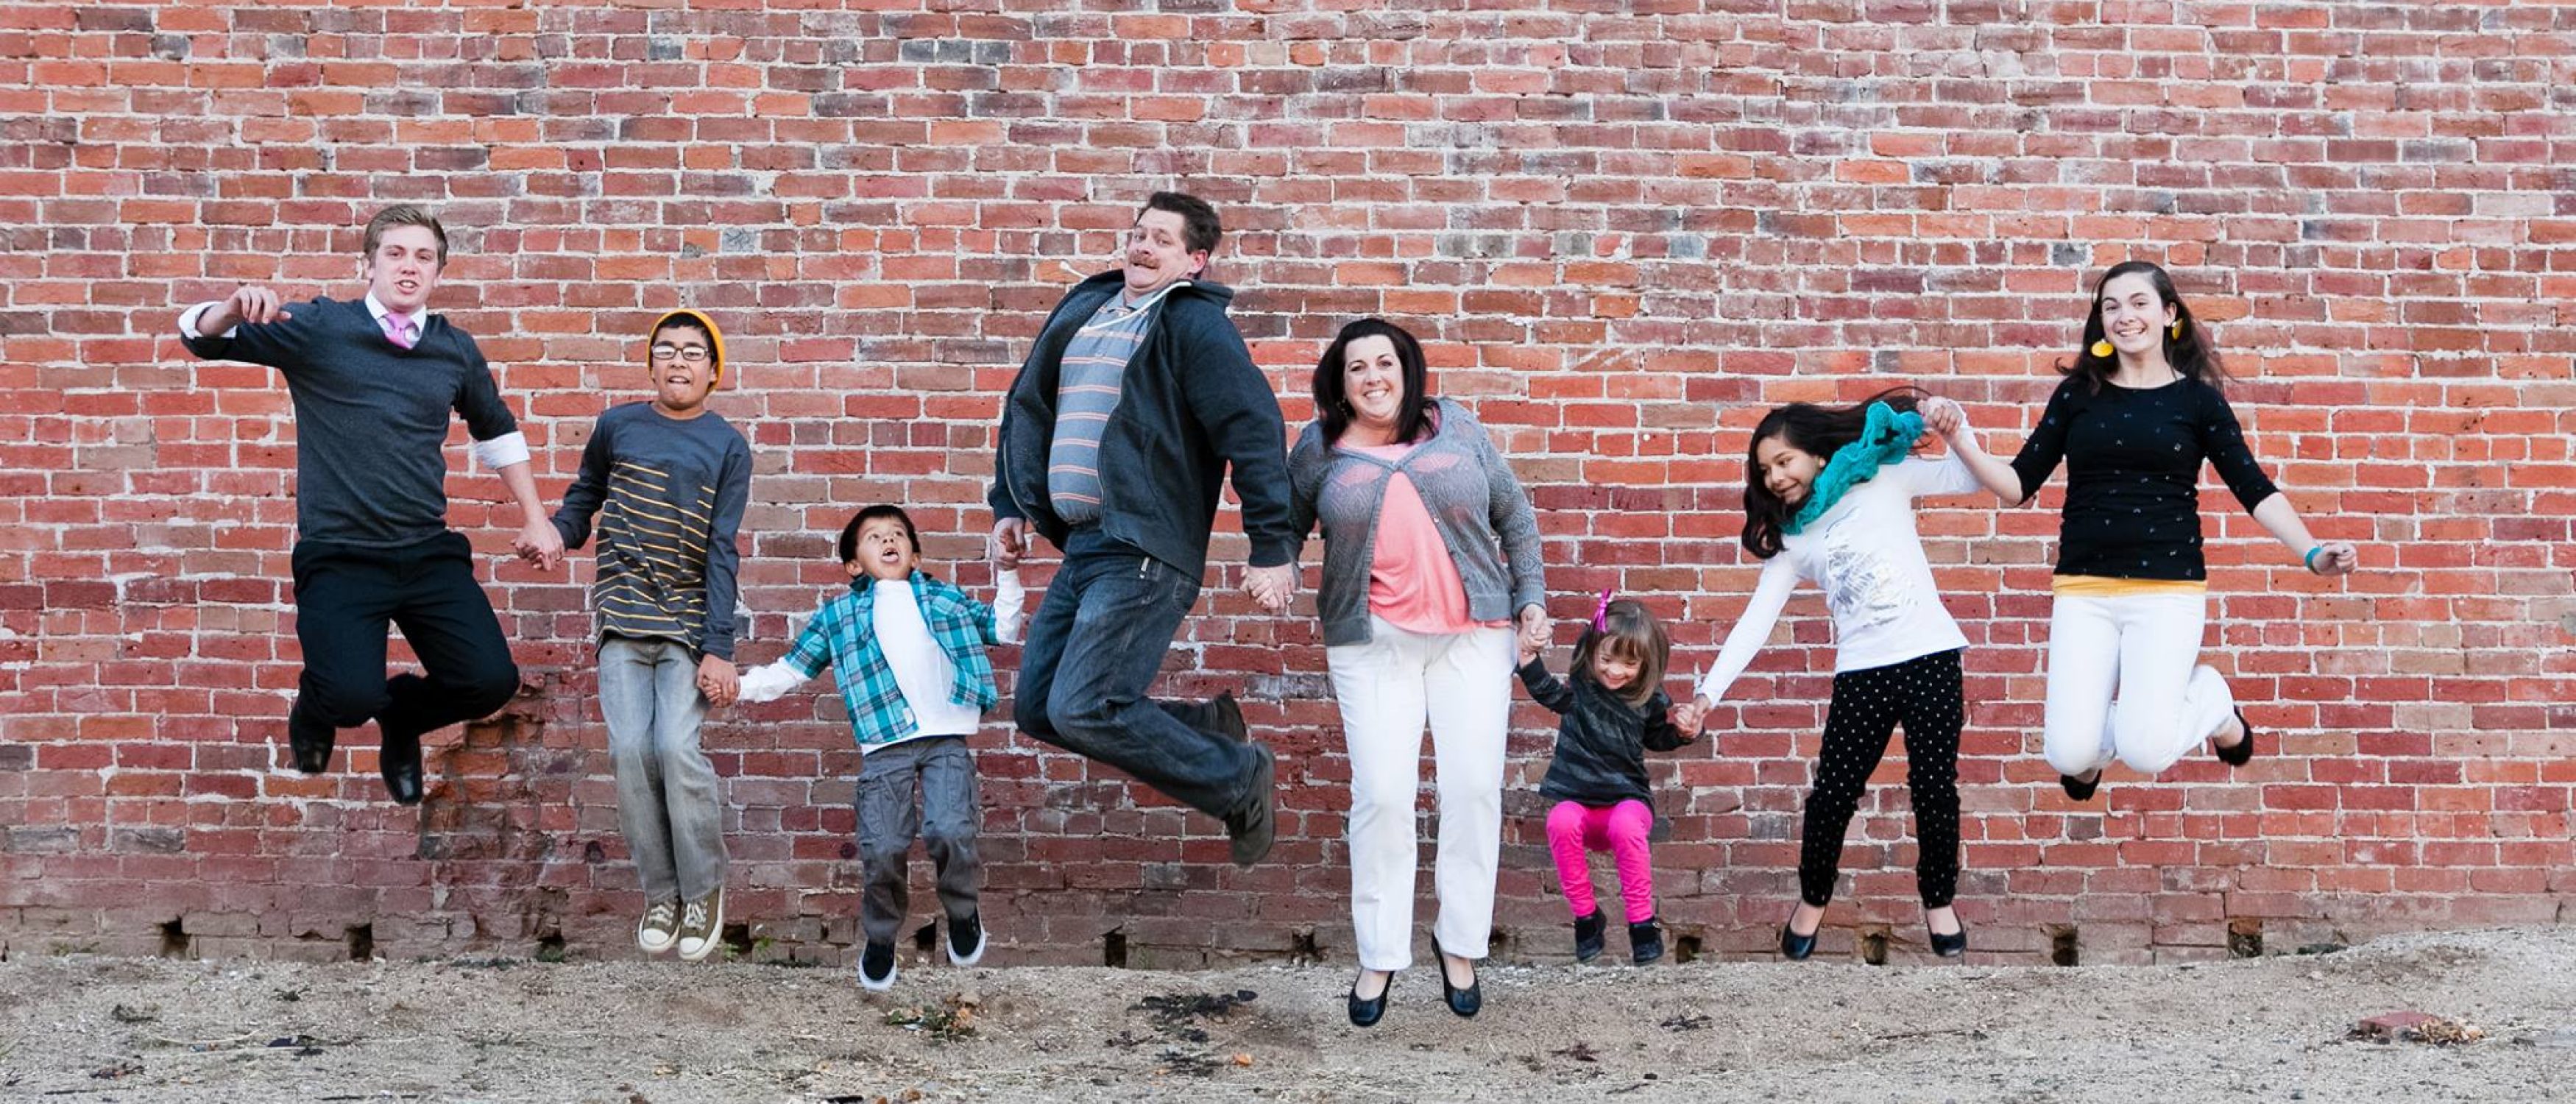 A group of people happily jumping in front of a real brick wall.